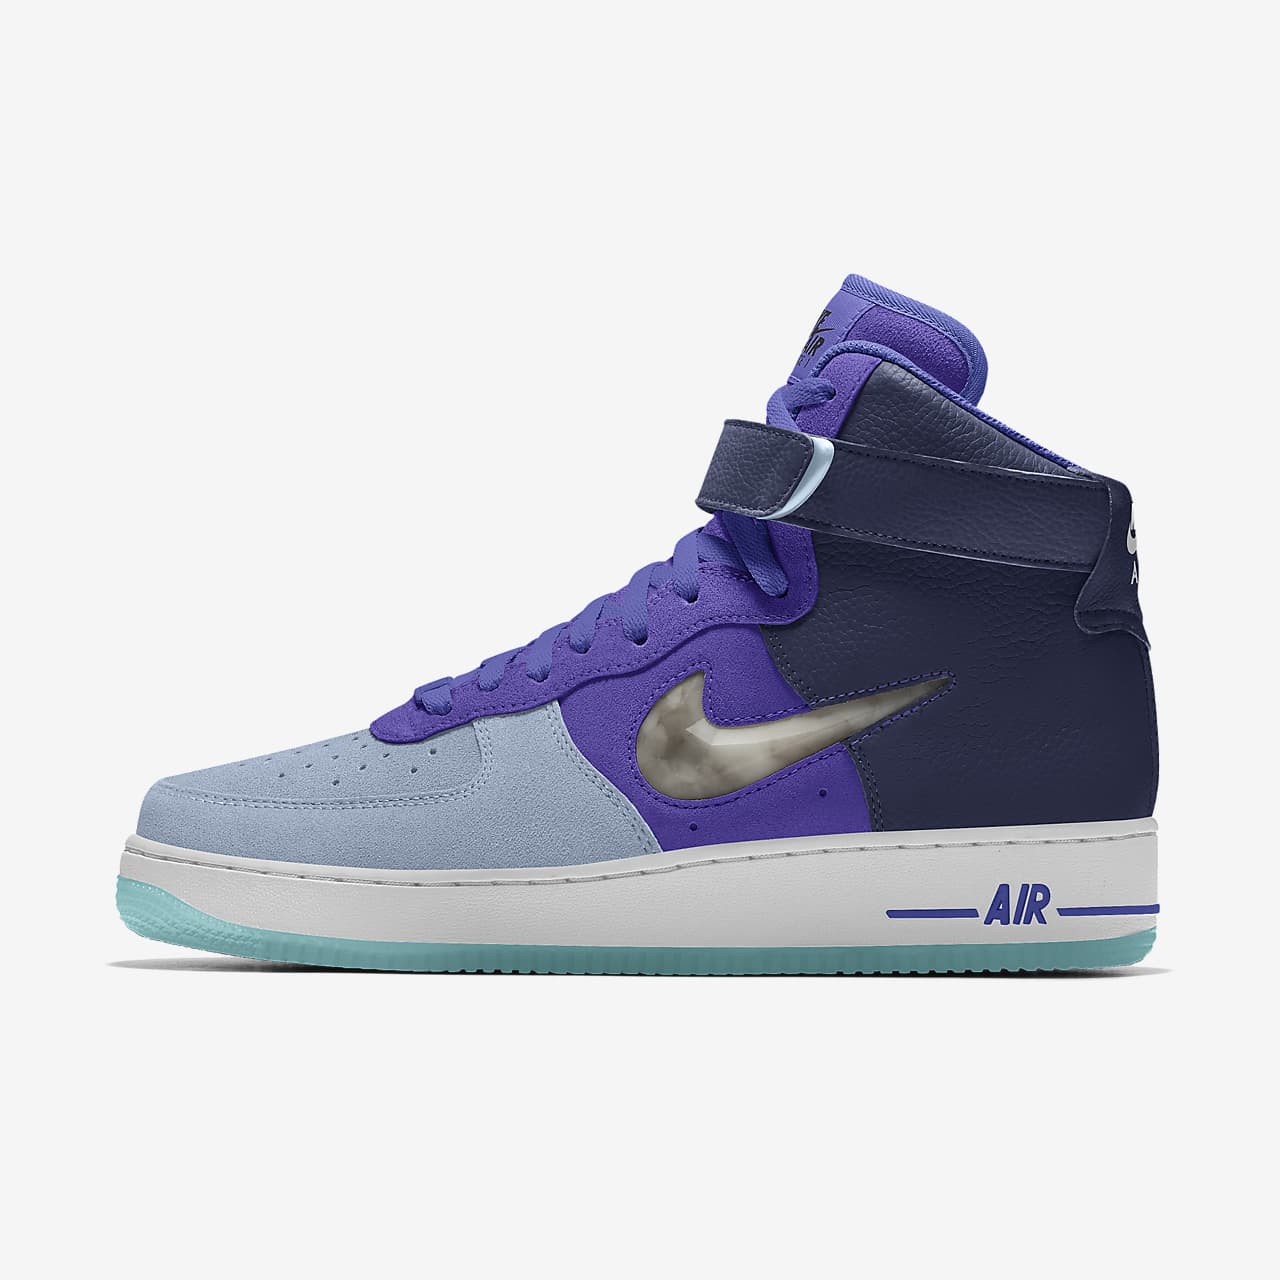 Chaussure personnalisable Nike Air Force 1 High Unlocked By You pour femme